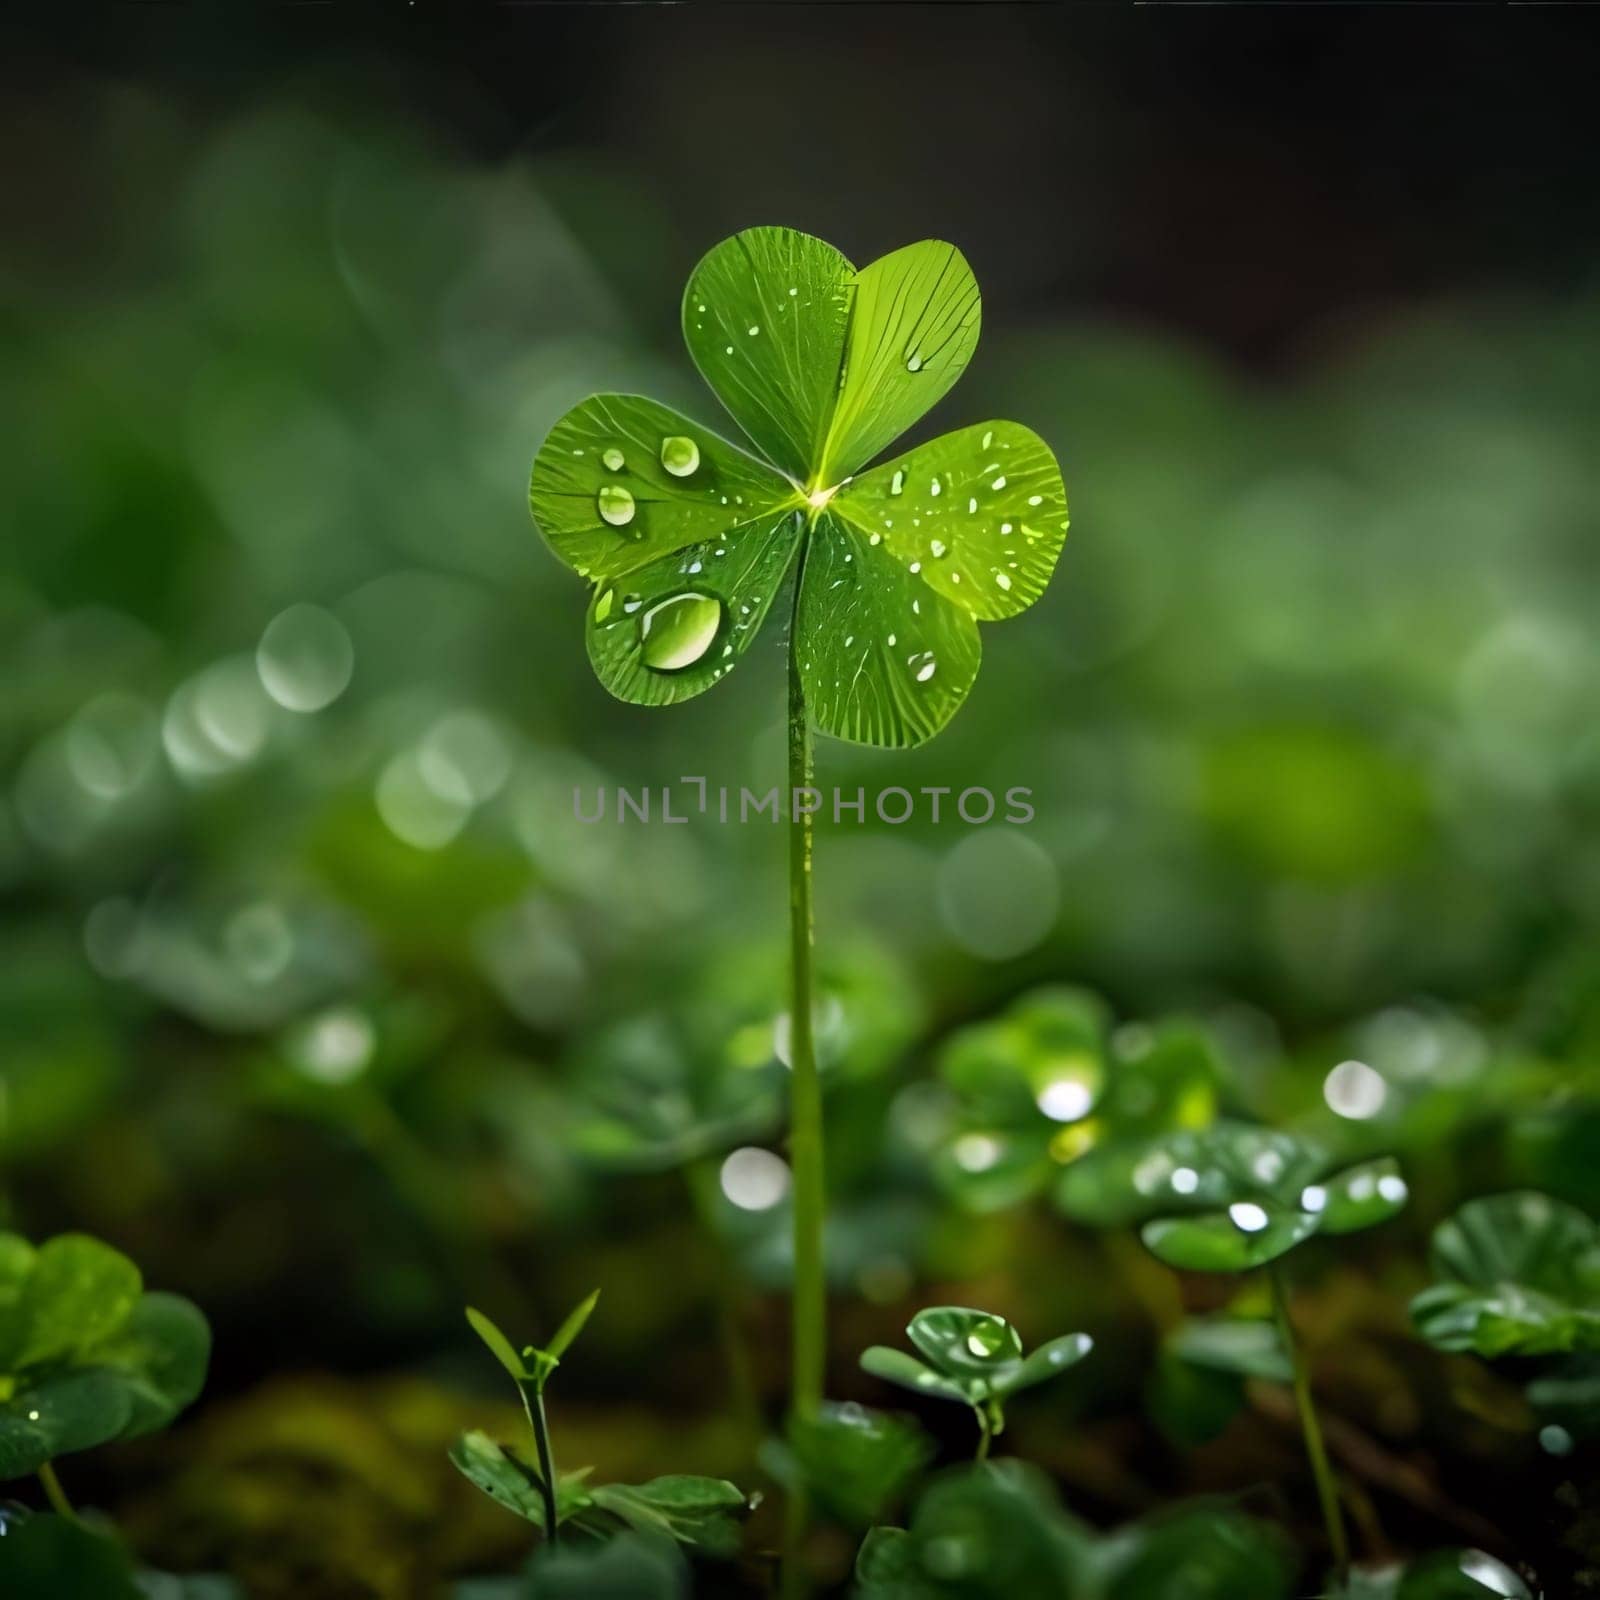 Large three-leaf green clover in a clearing with dewdrops, blurred background. The green color symbol of St. Patrick's Day. by ThemesS